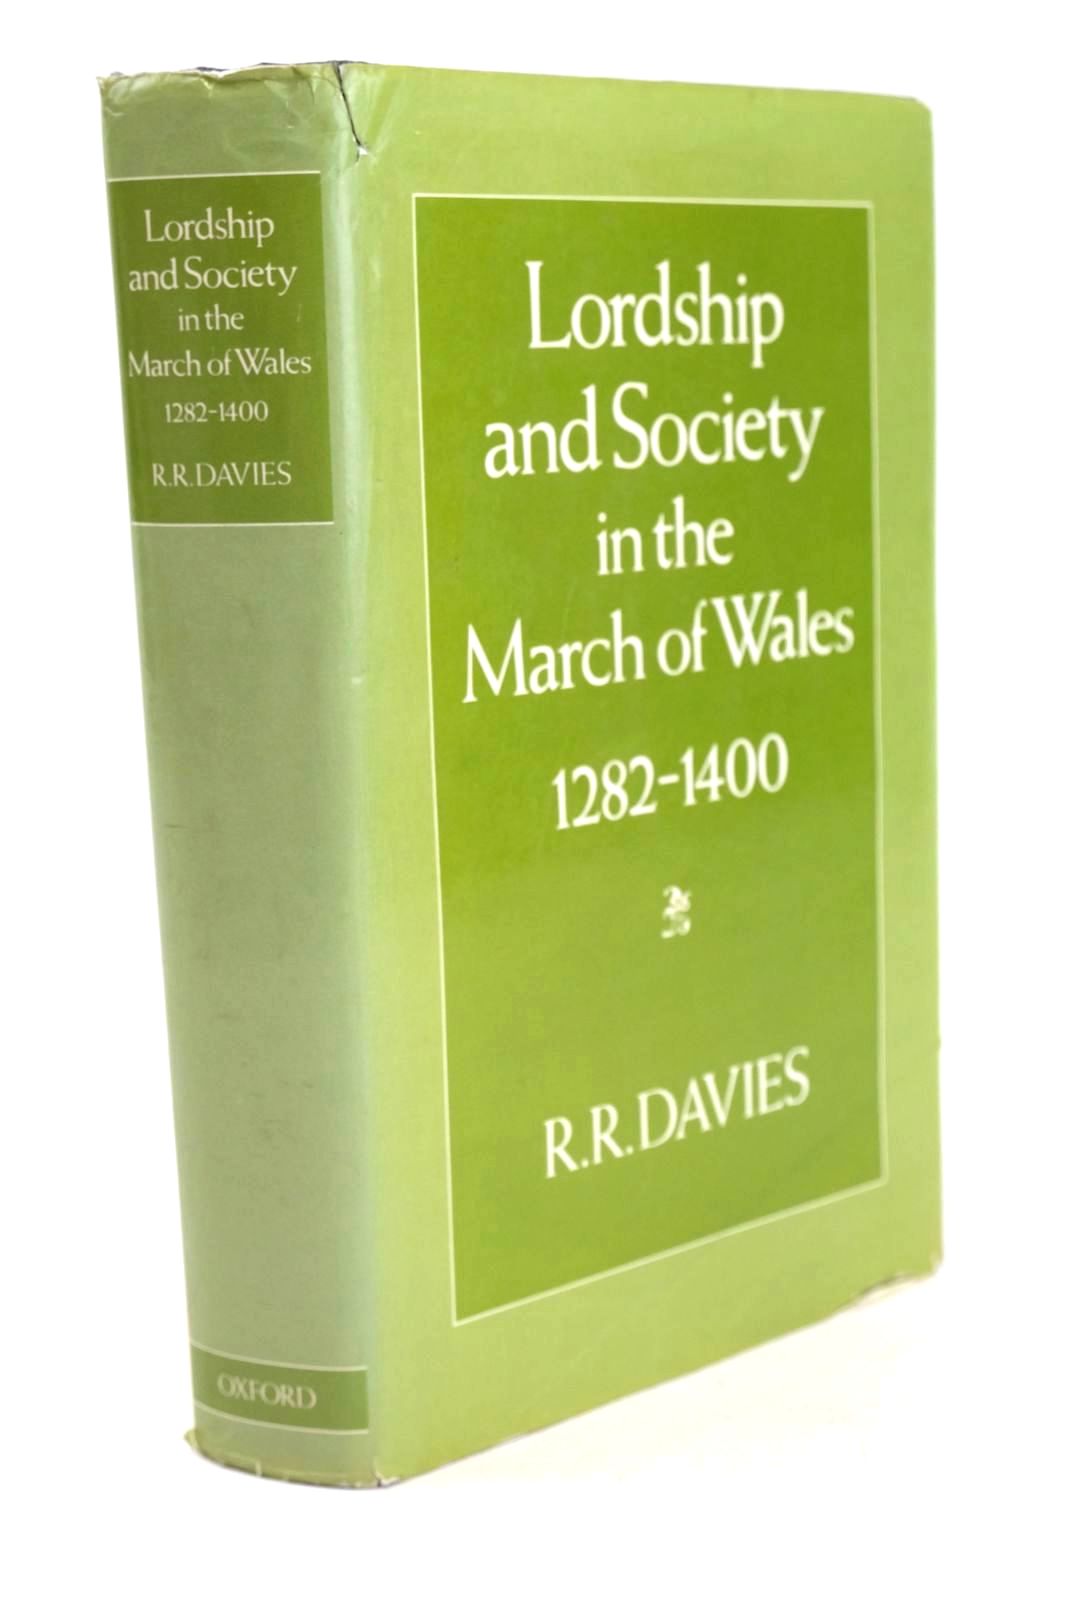 Photo of LORDSHIP AND SOCIETY IN THE MARCH OF WALES 1282-1400 written by Davies, R.R. published by Oxford University Press (STOCK CODE: 1327128)  for sale by Stella & Rose's Books